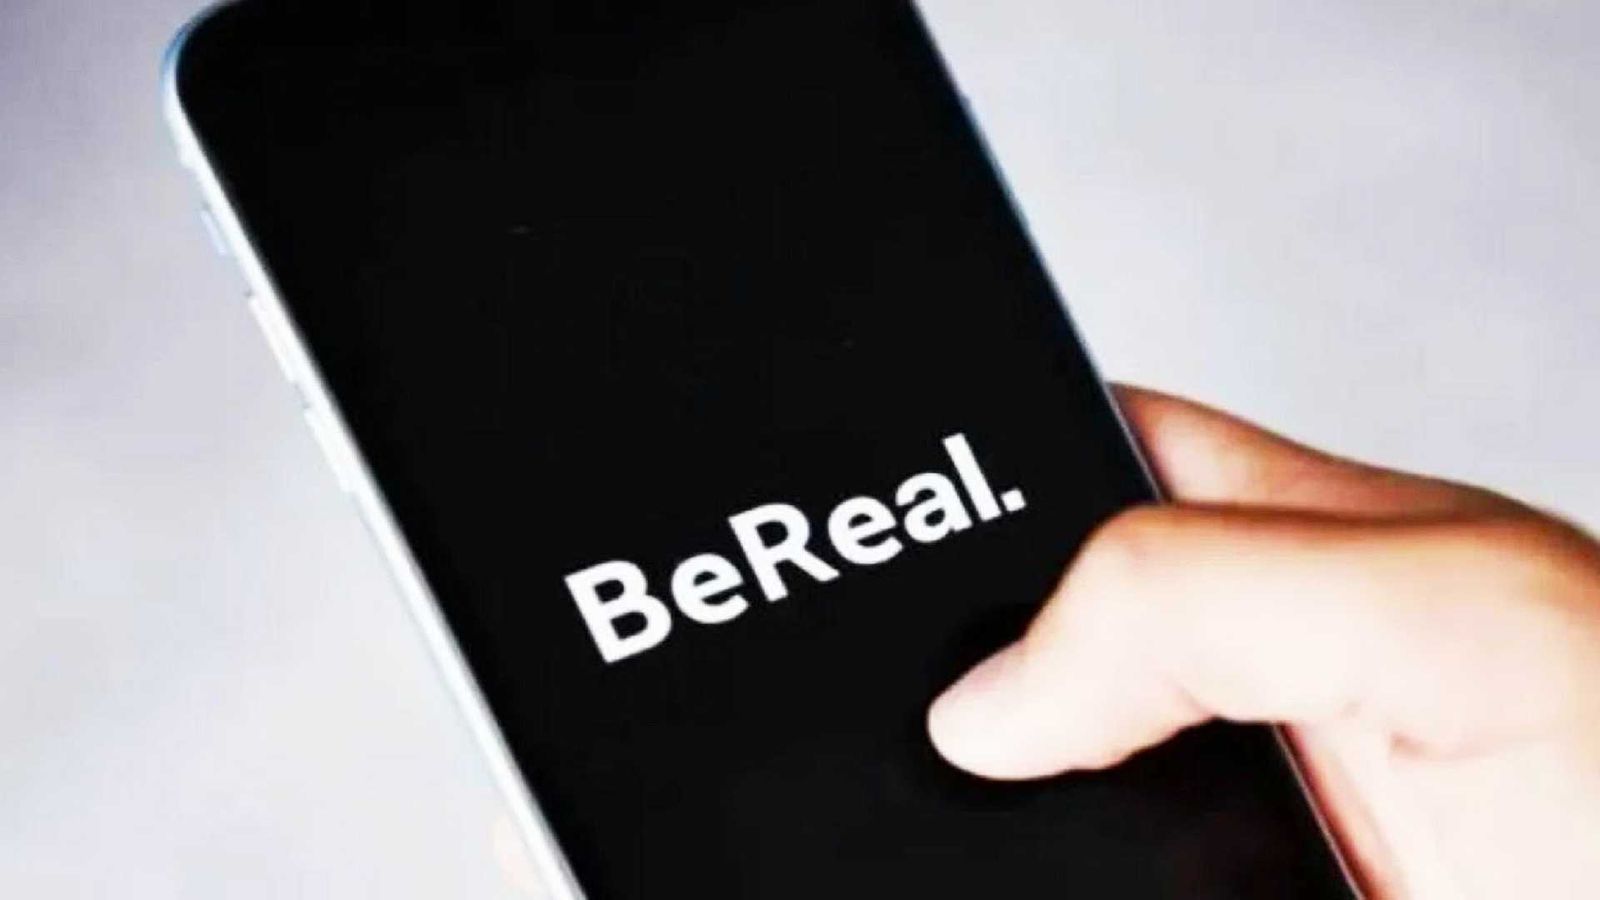 A phone displaying the BeReal app